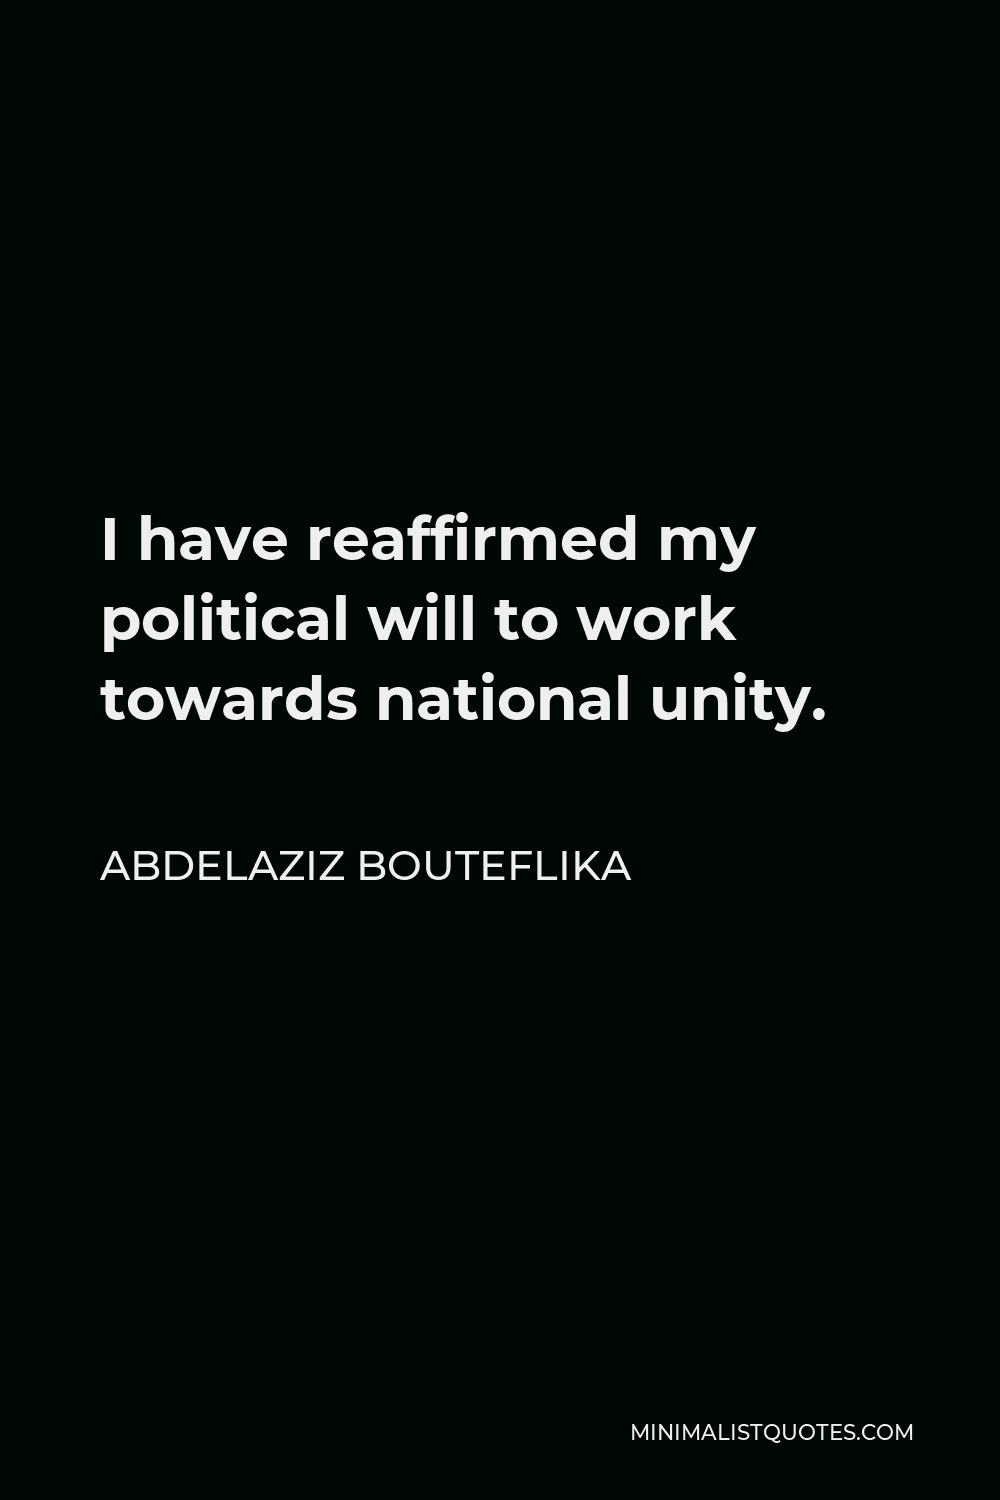 Abdelaziz Bouteflika Quote - I have reaffirmed my political will to work towards national unity.